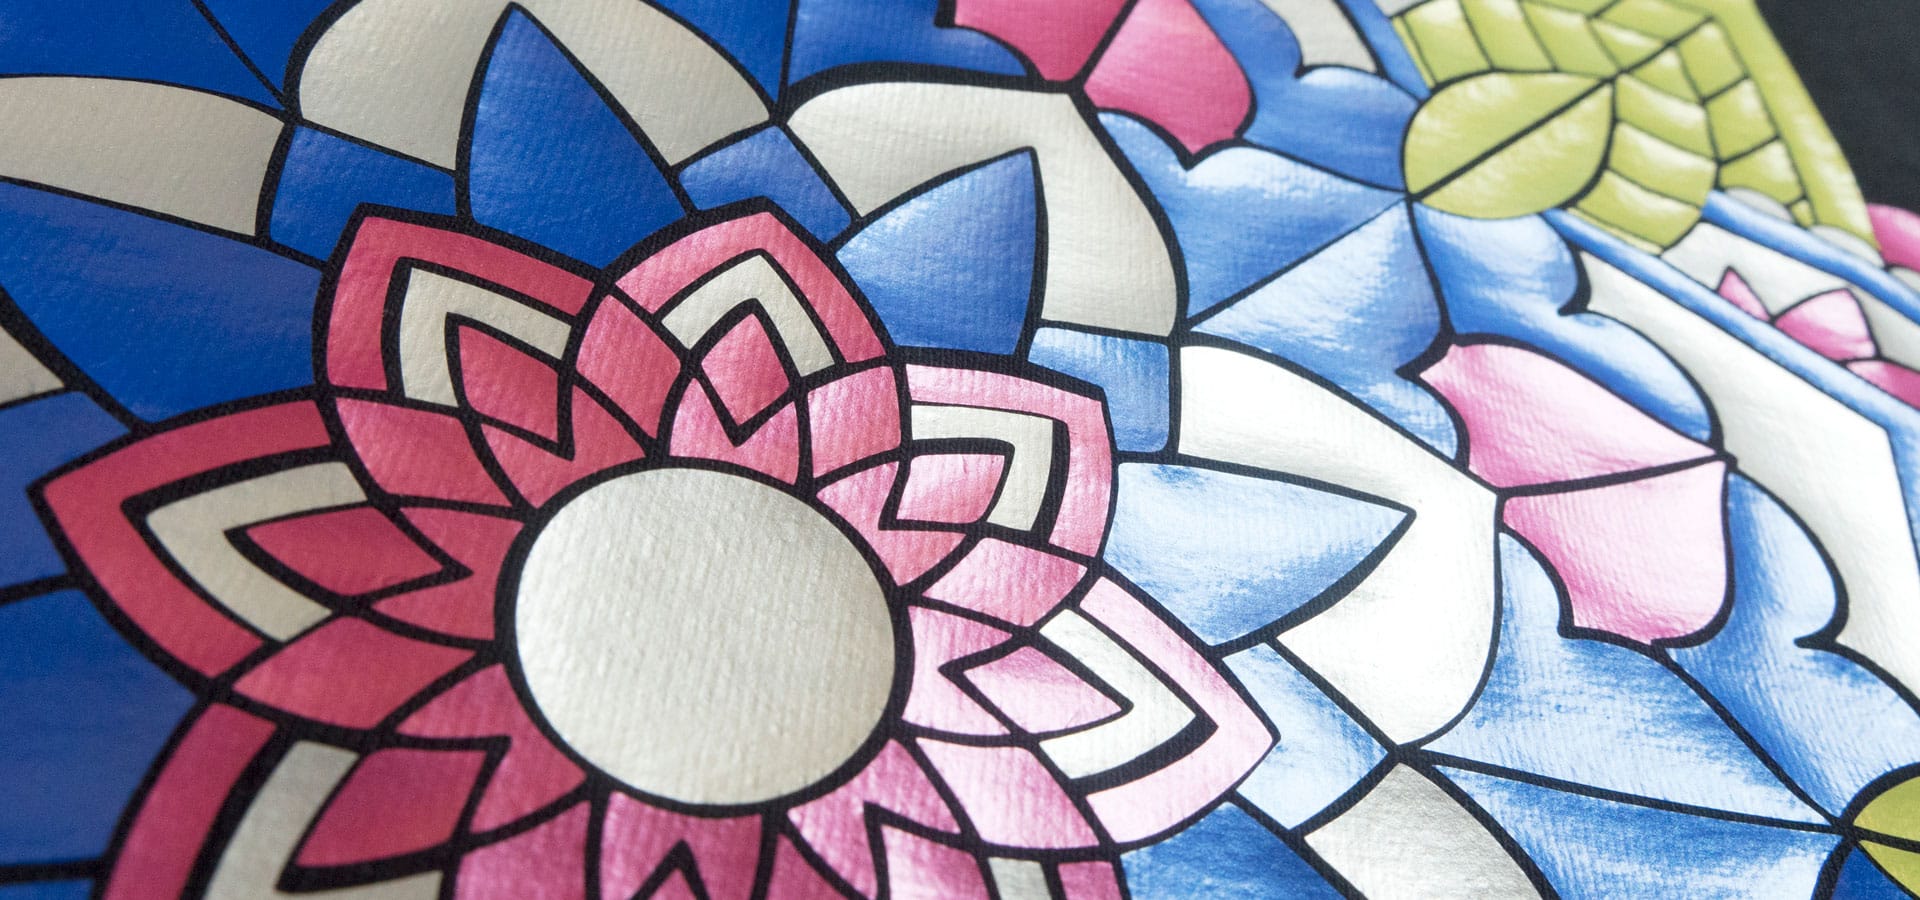 A close up of a detailed manadala design made using Cobalt Blue, Pearl White, Lime Yellow, and Watermelon DecoFilm Paint FX